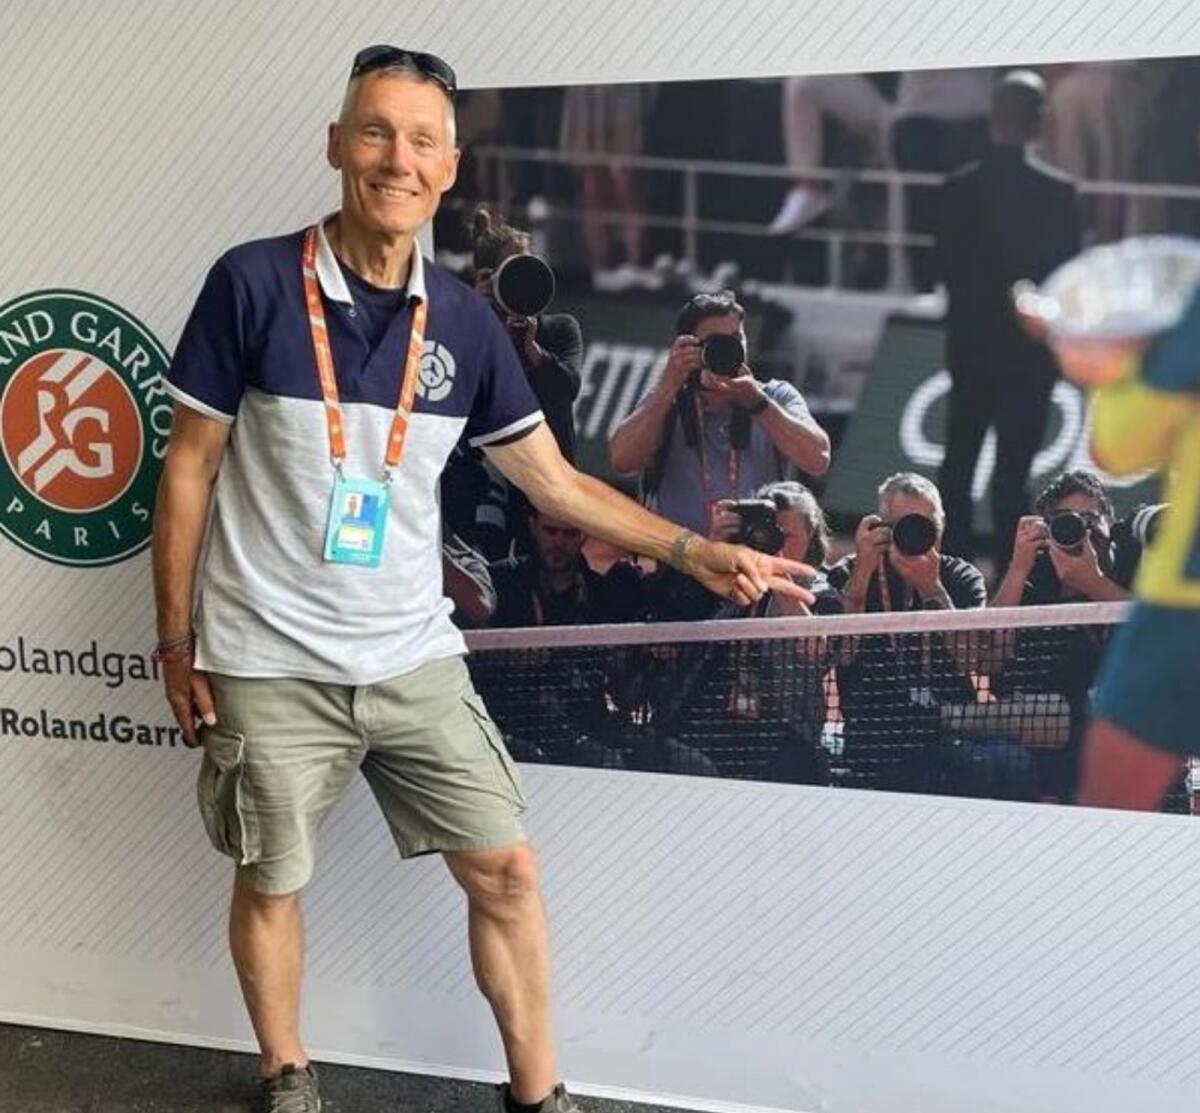 Hasenkopf poses in front of a photograph at the French Open.  In the image, he is in the front row with other photographers, photographing the awards ceremony after the final.